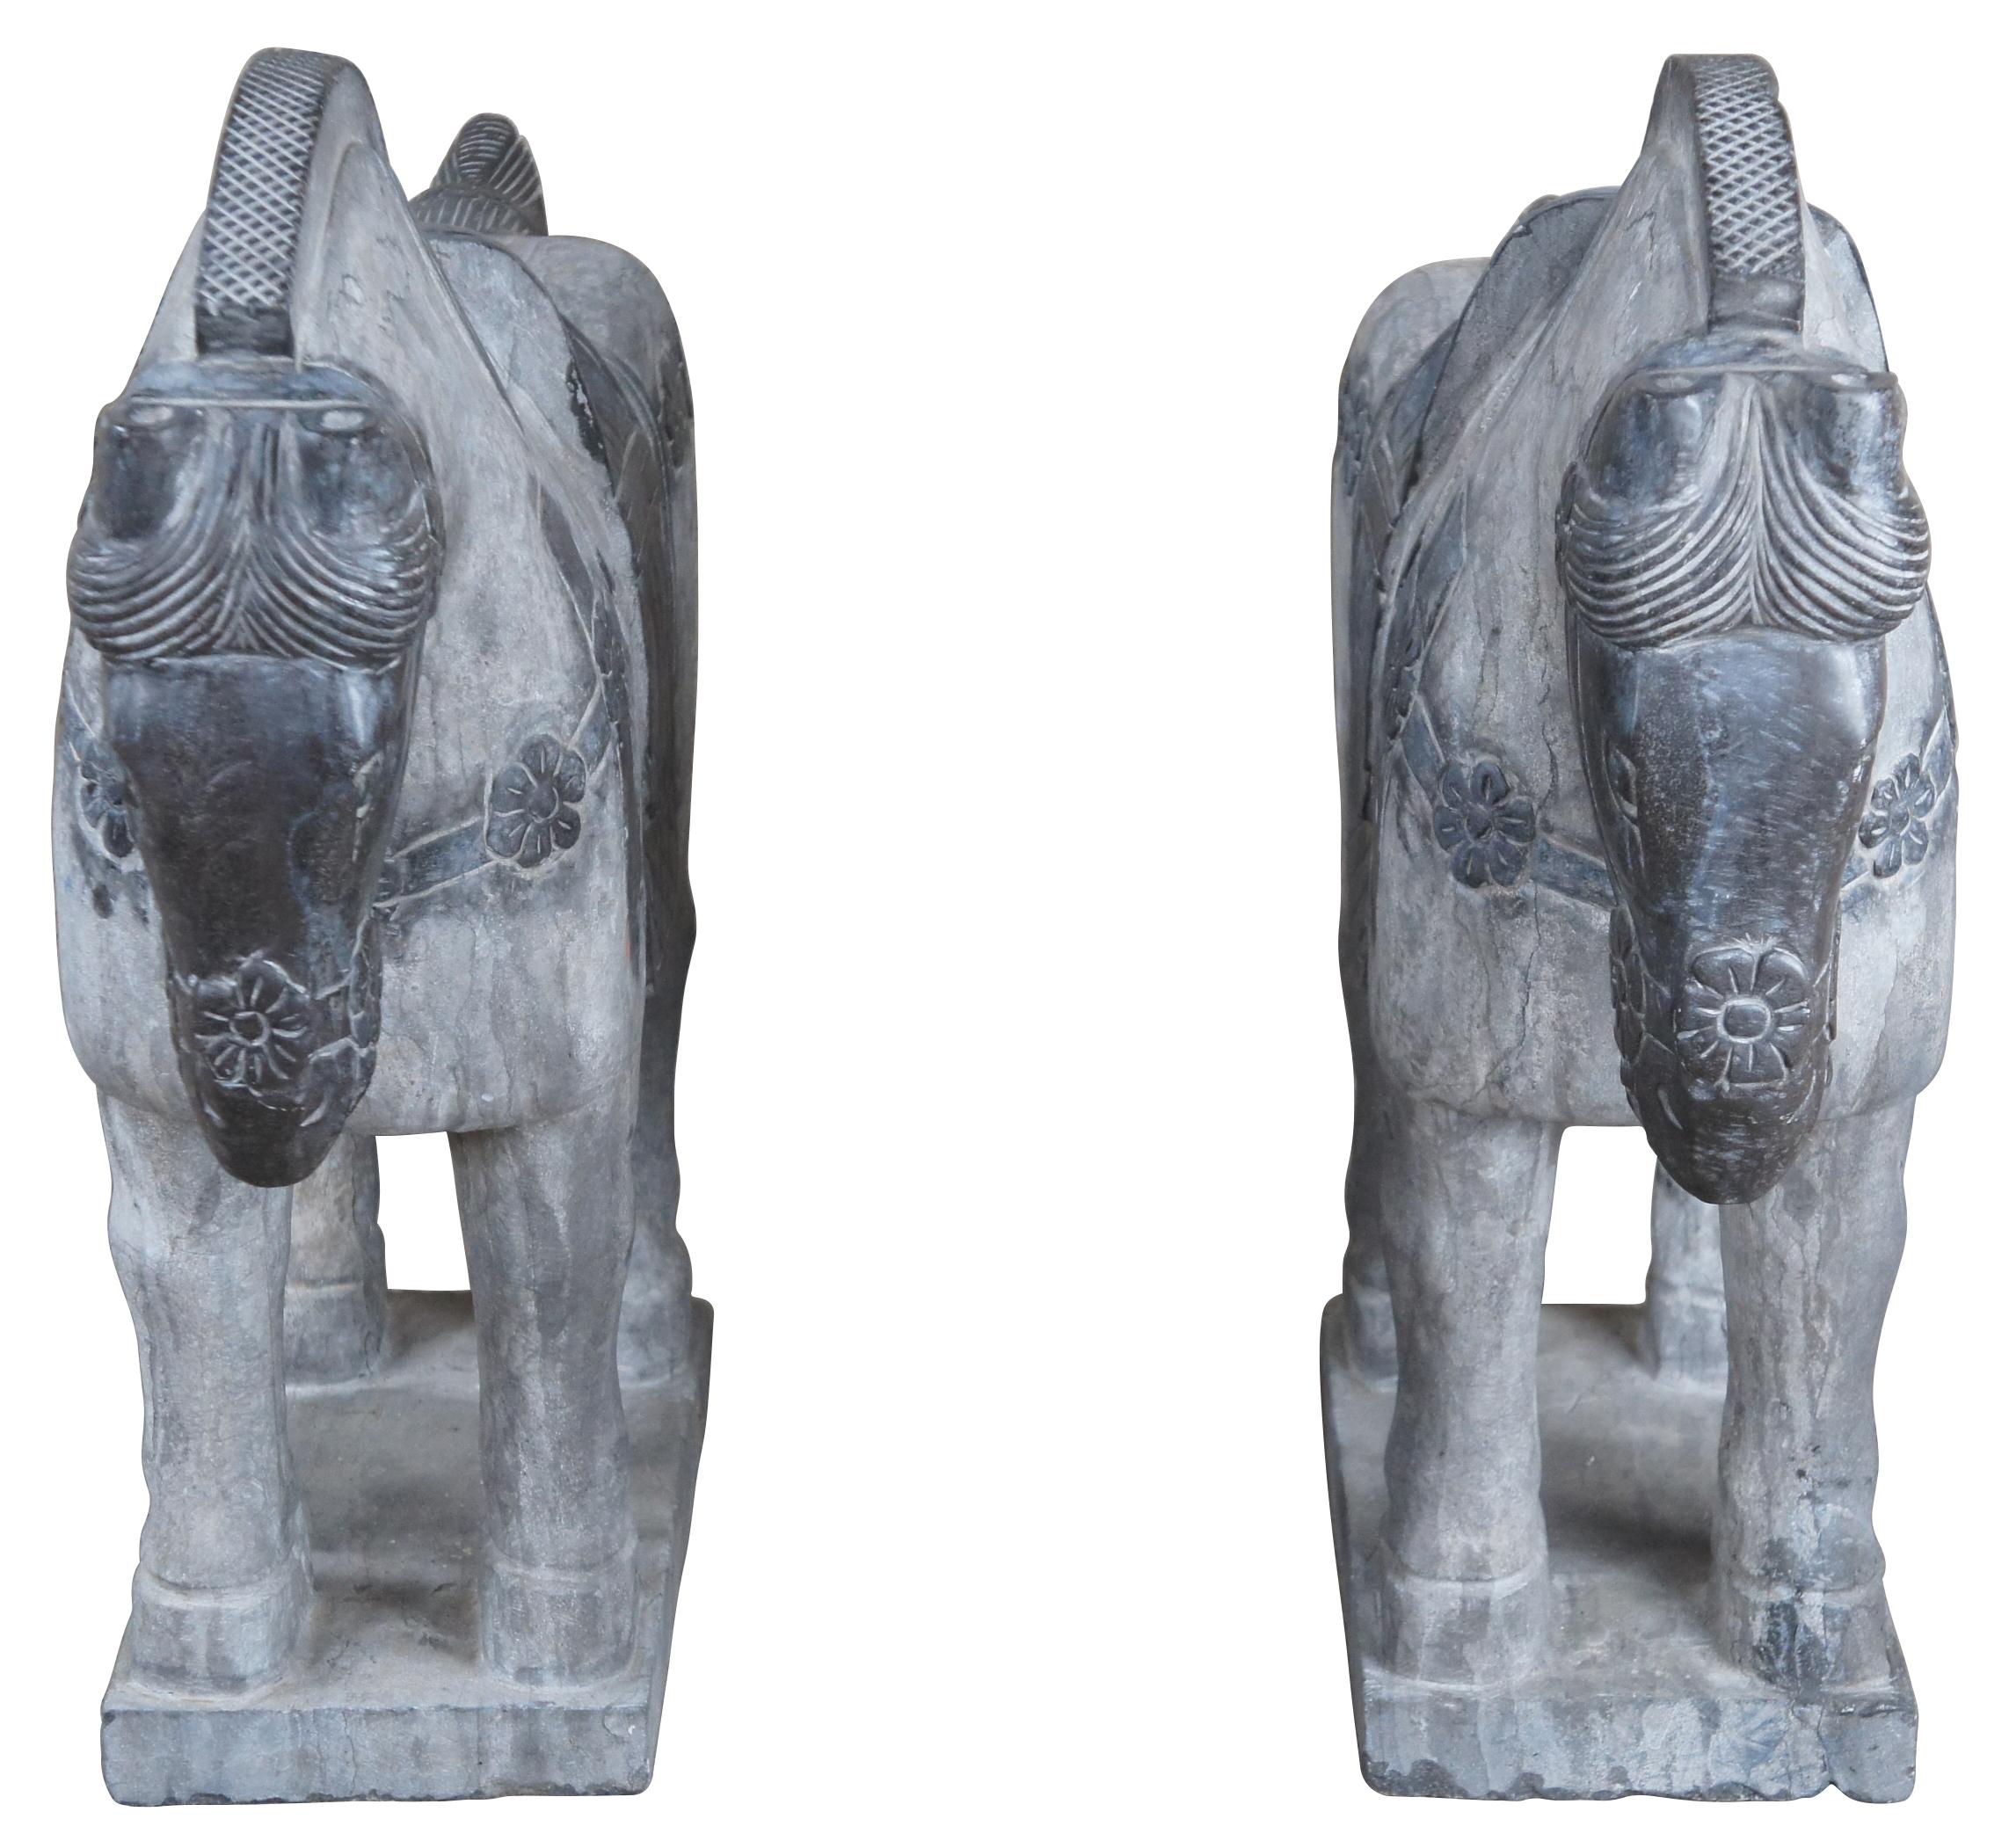 In Chinese culture, the horse is the embodiment of strength, elegance, and perseverance. This imperial palace horse sculpture depicts a noble steed standing with its head raised. This specific pose was very common in horse sculptures crafted during